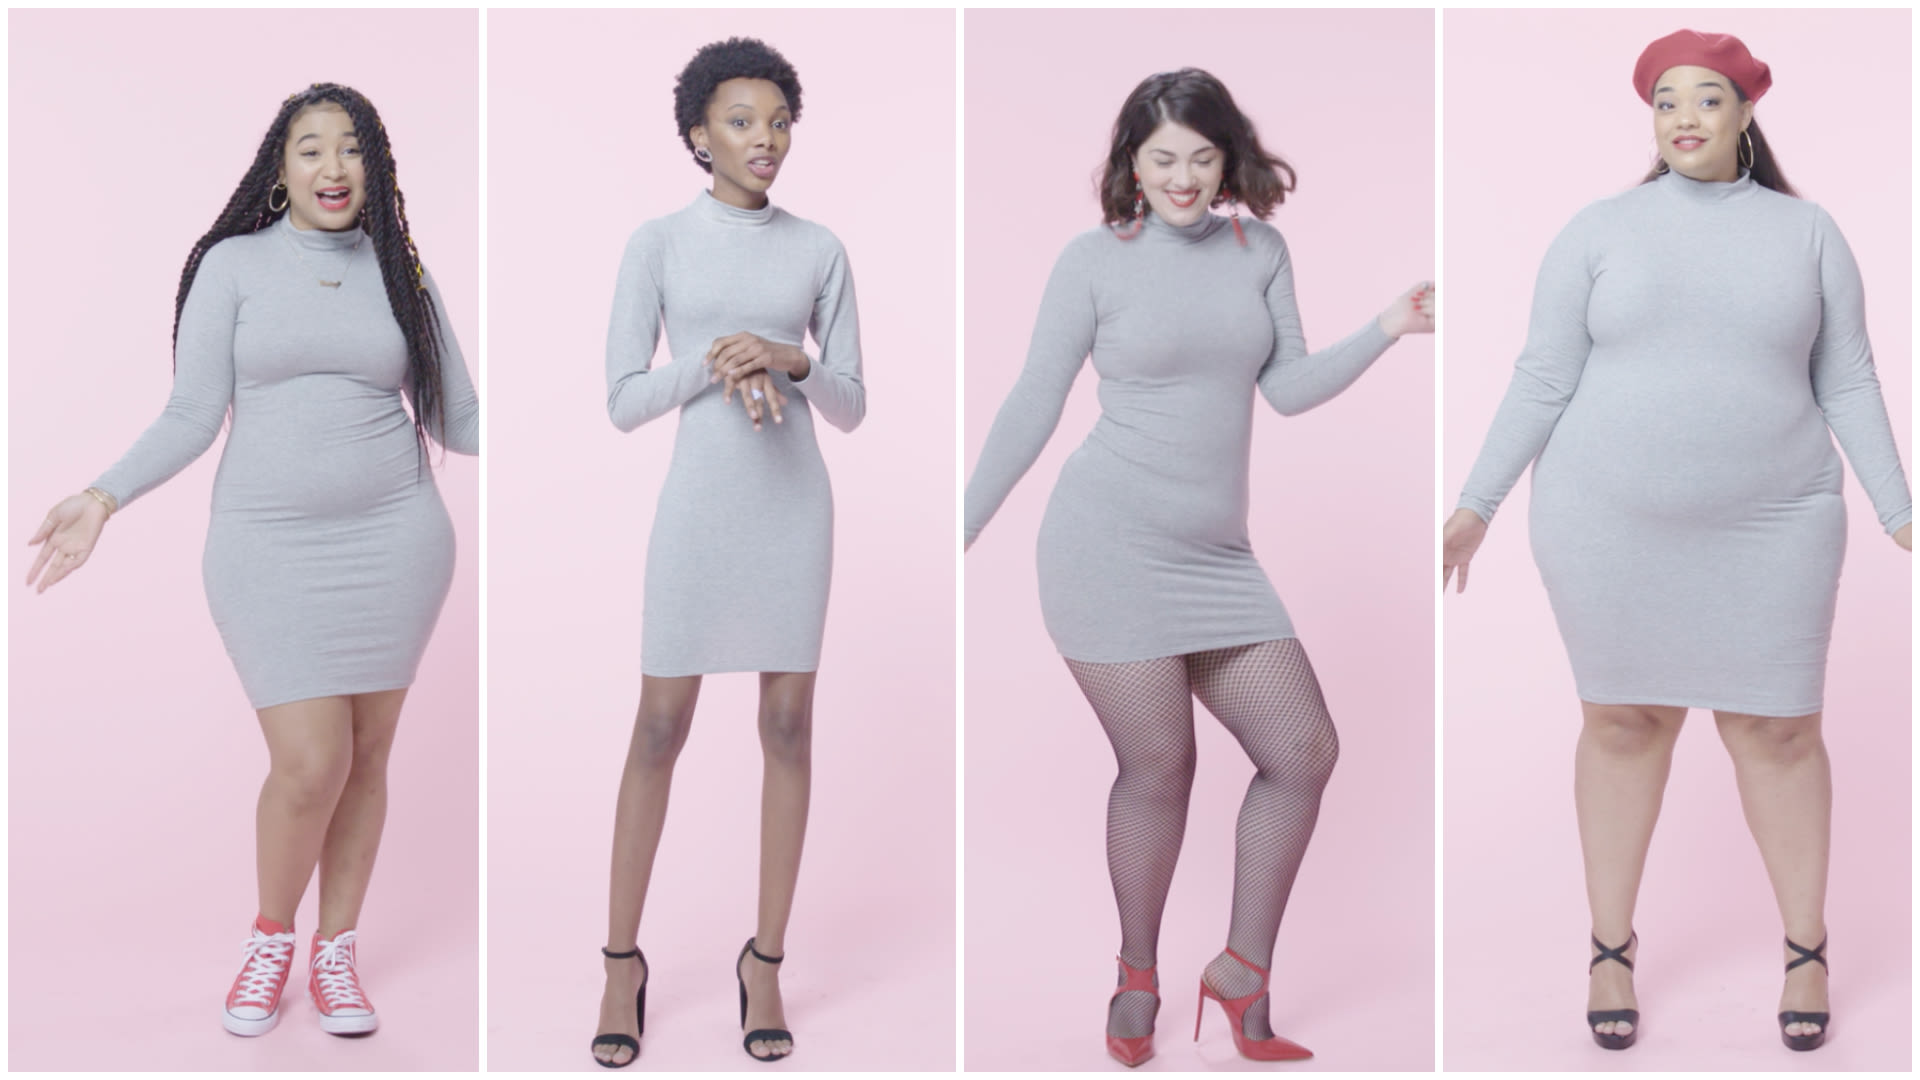 What is a Bodycon Dress and How to Wear Them The Right Way?